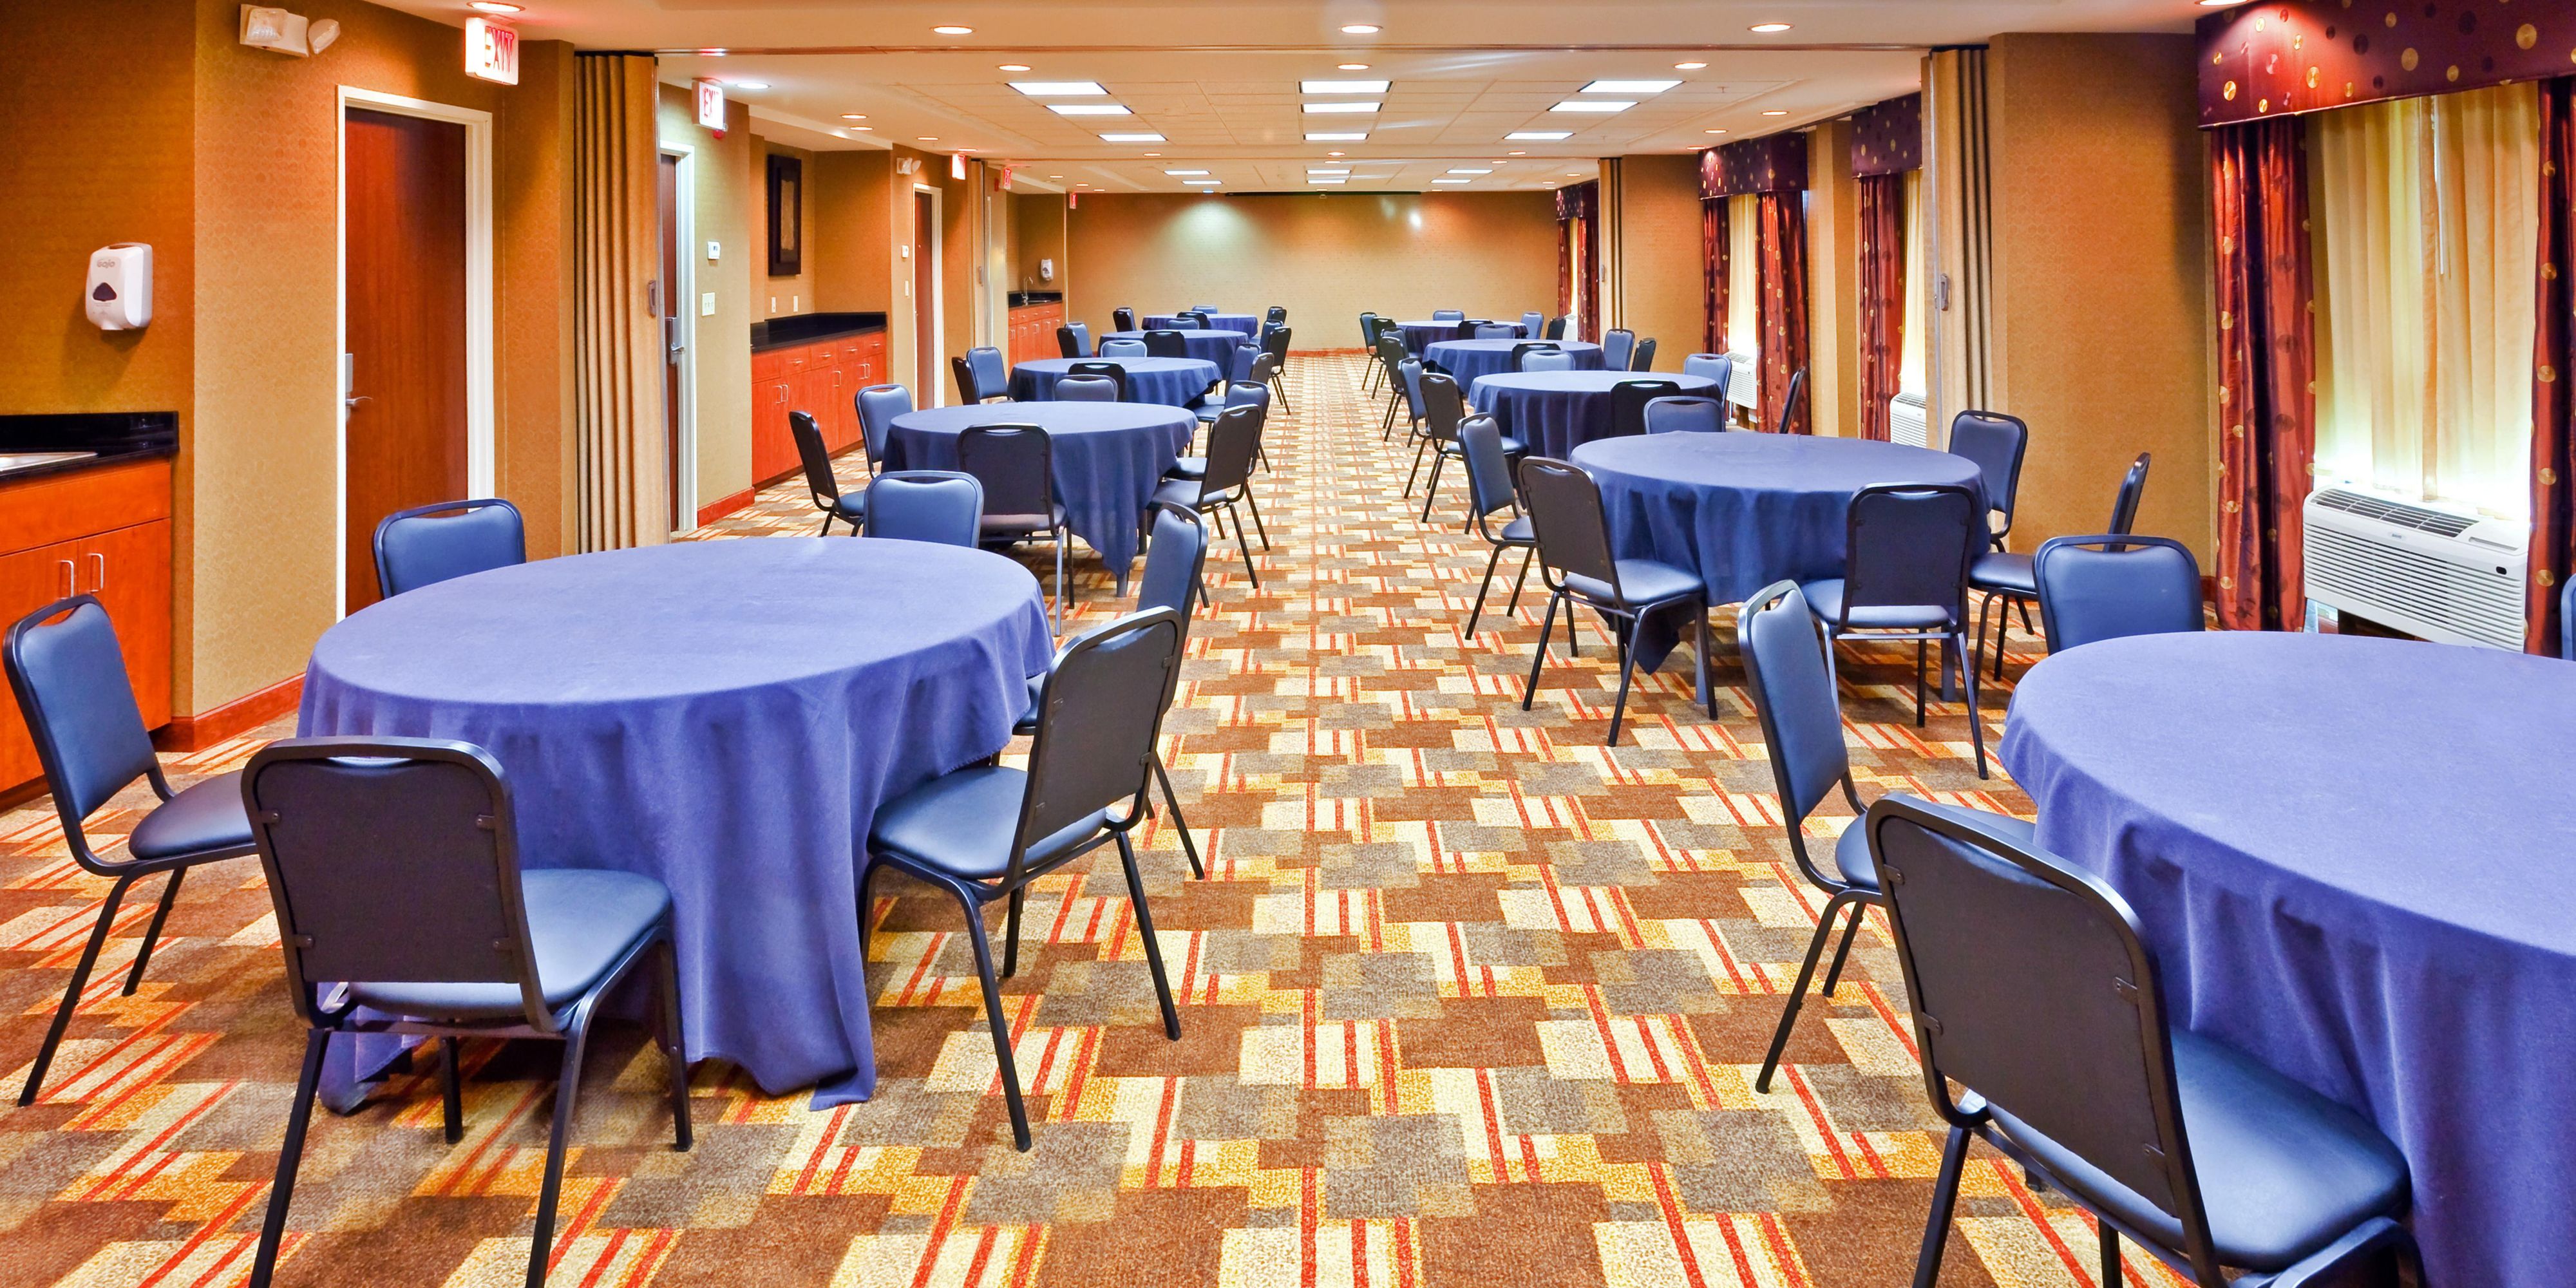 We offer guests 2100 square feet of flexible meeting space to meet your needs. Catering and A/V services are available also.